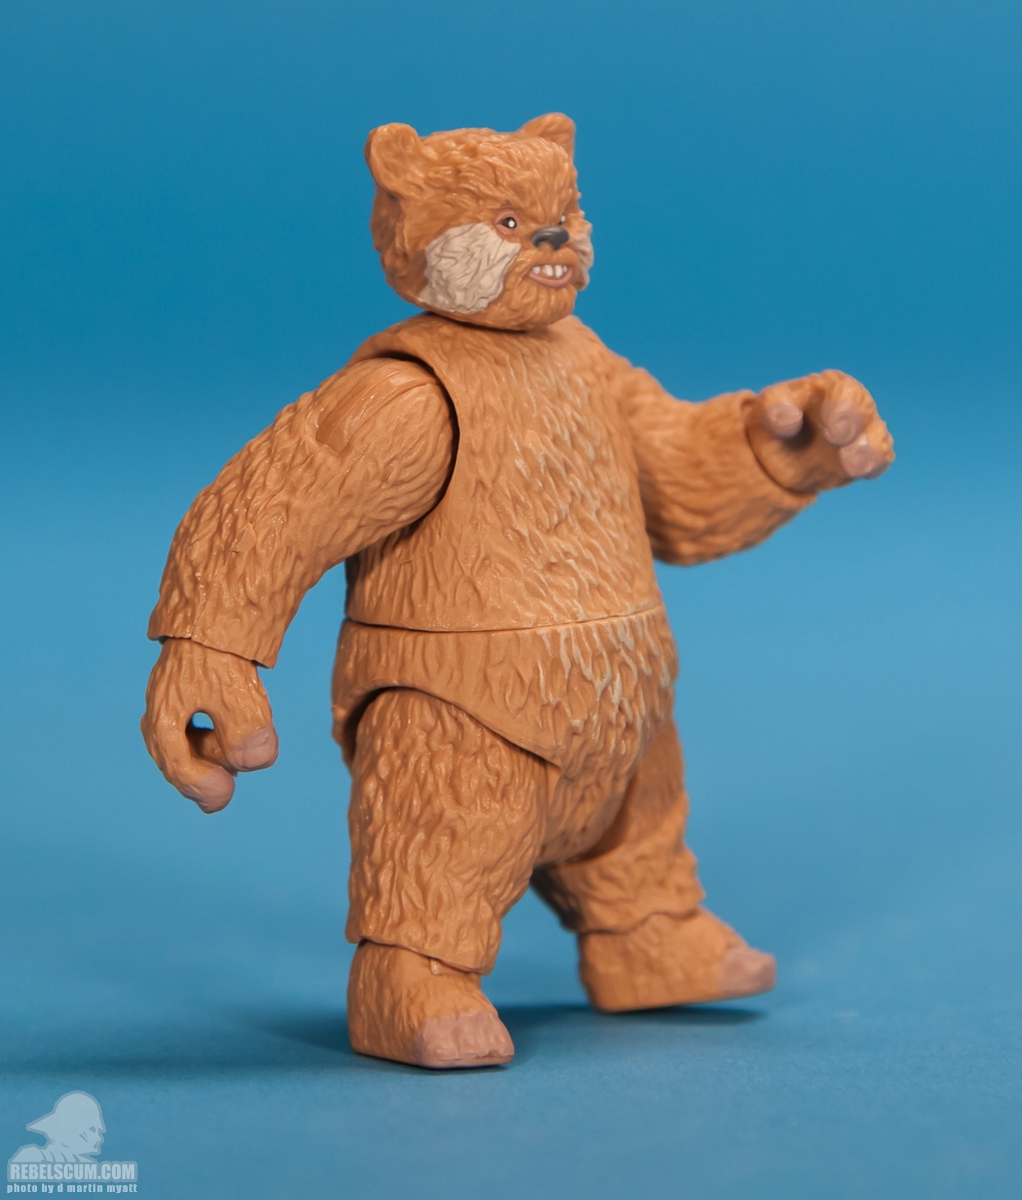 Ewok_Scouts_The_Vintage_Collection_TVC_Kmart-02.jpg